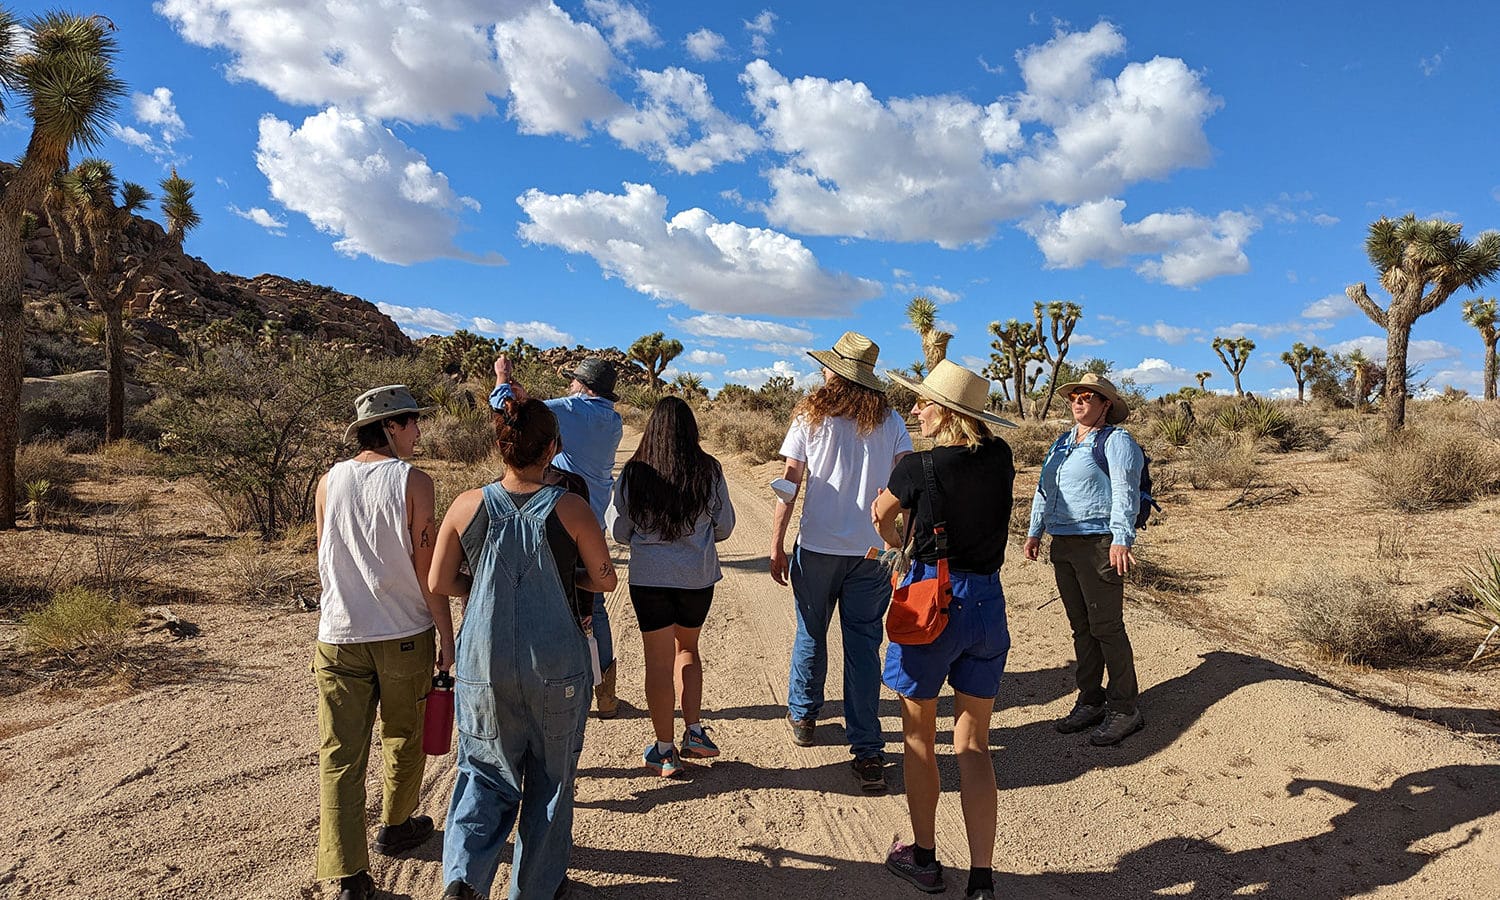 Group walks on trail surrounded by Joshua trees with cloudy blue sky overhead